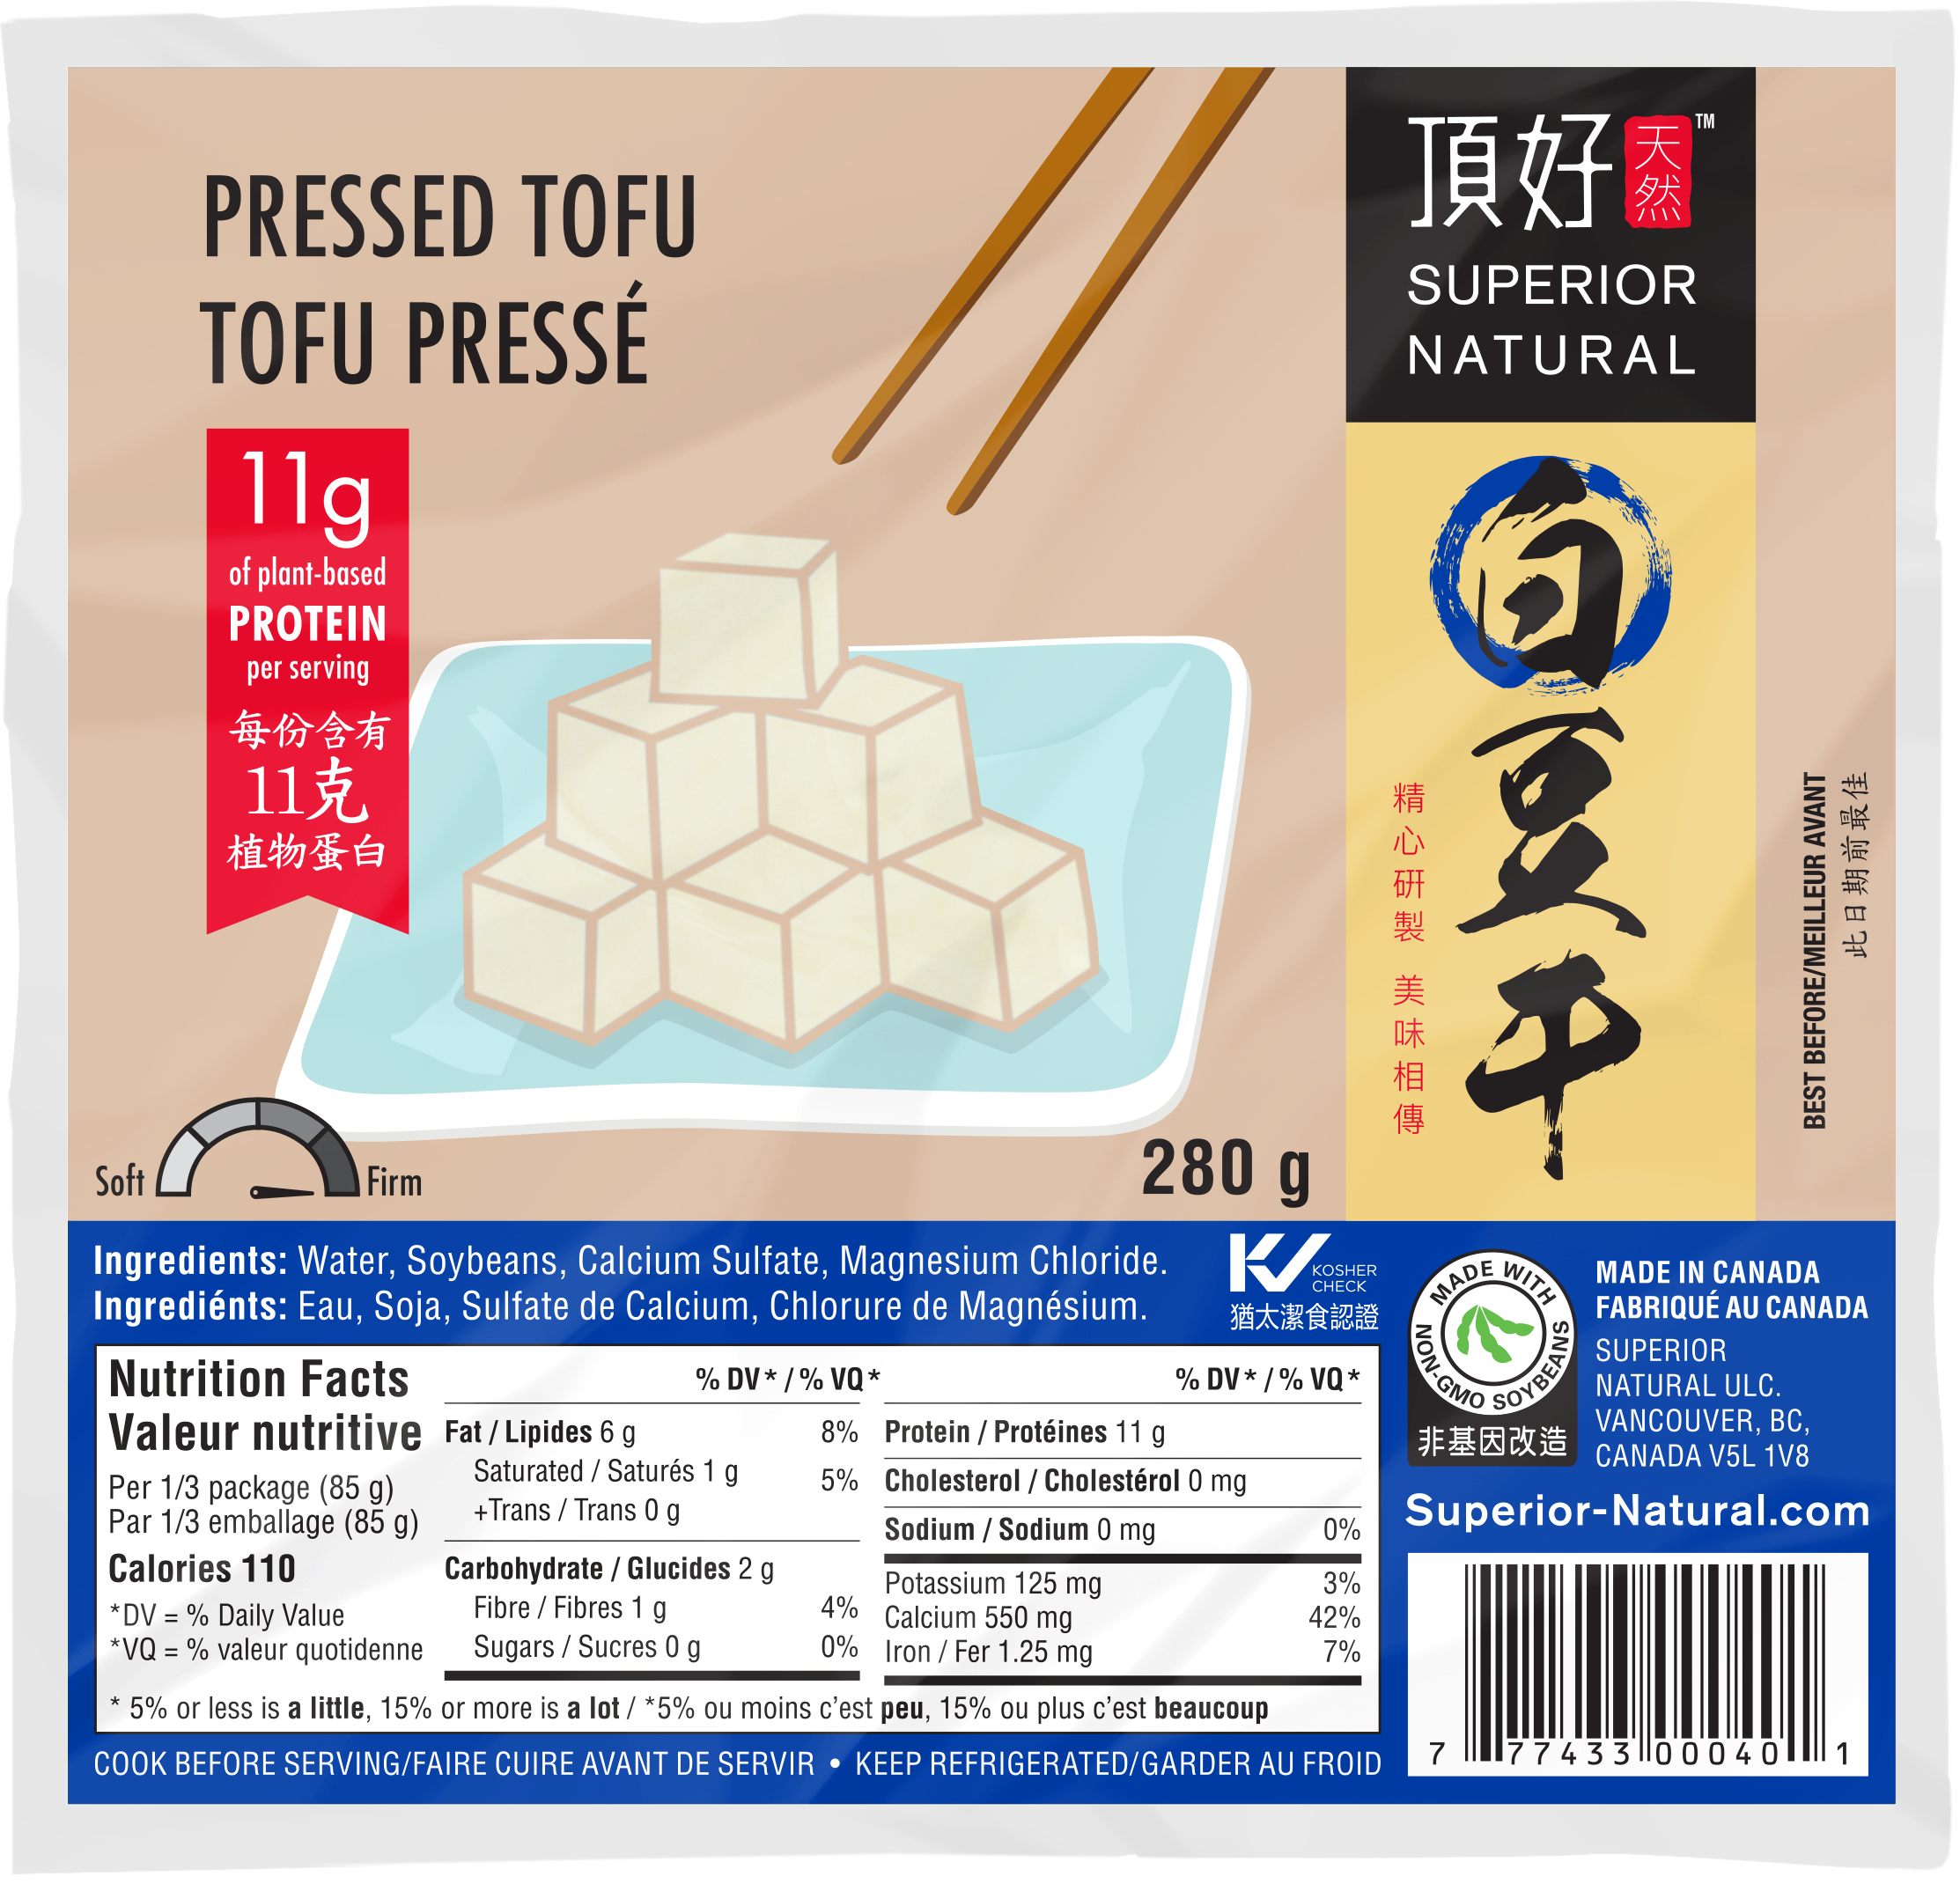 What is tofu and is it good for you? — Superior Natural